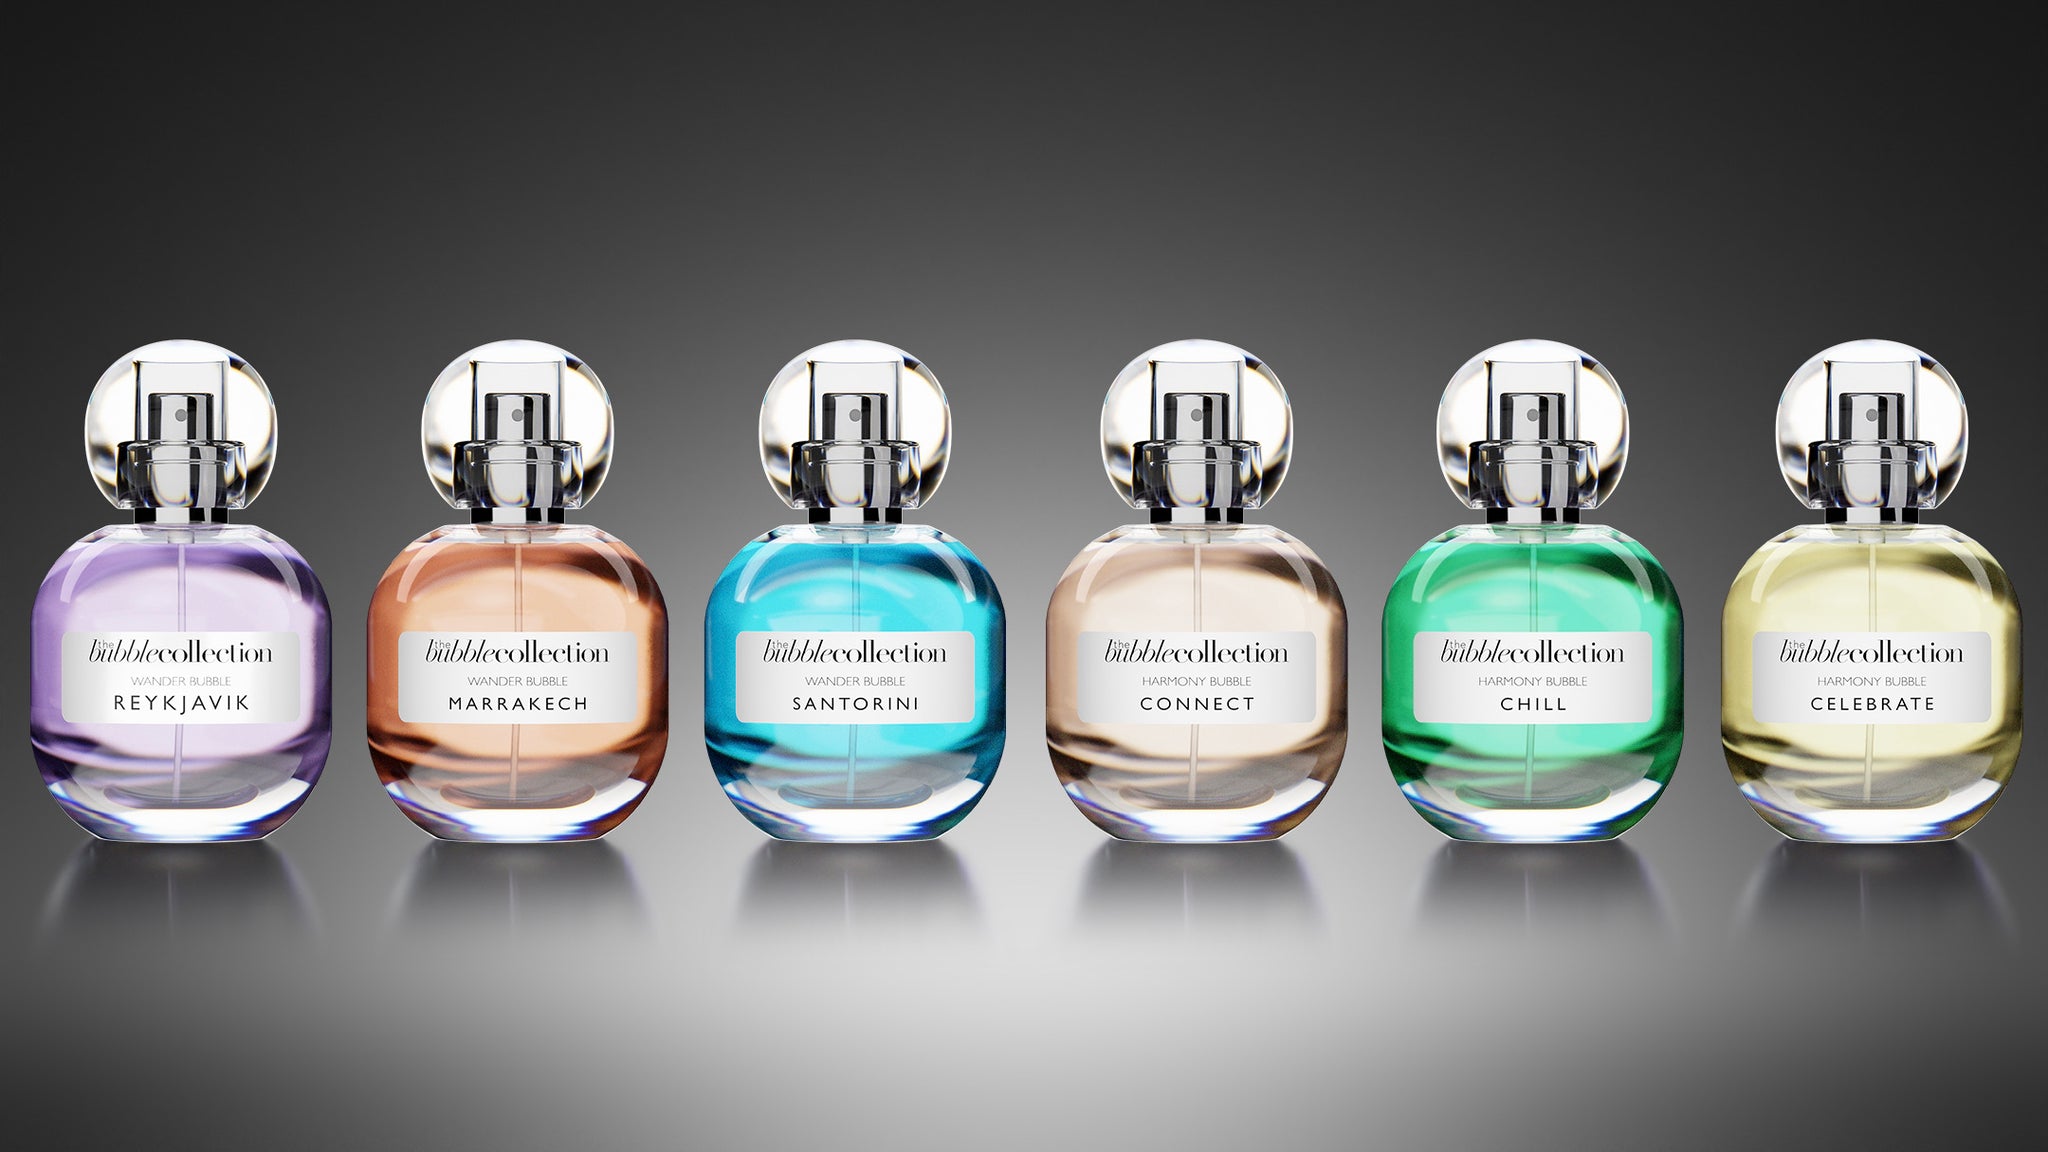 The Bubble Collection, fine niche genderless fragrances. Small batch, handcrafted, Made in USA in bottles designed in Italy. Created by master perfumers in NYC and Paris. Fragrance for her, fragrance for him, fragrance for them. Niche luxury scents.